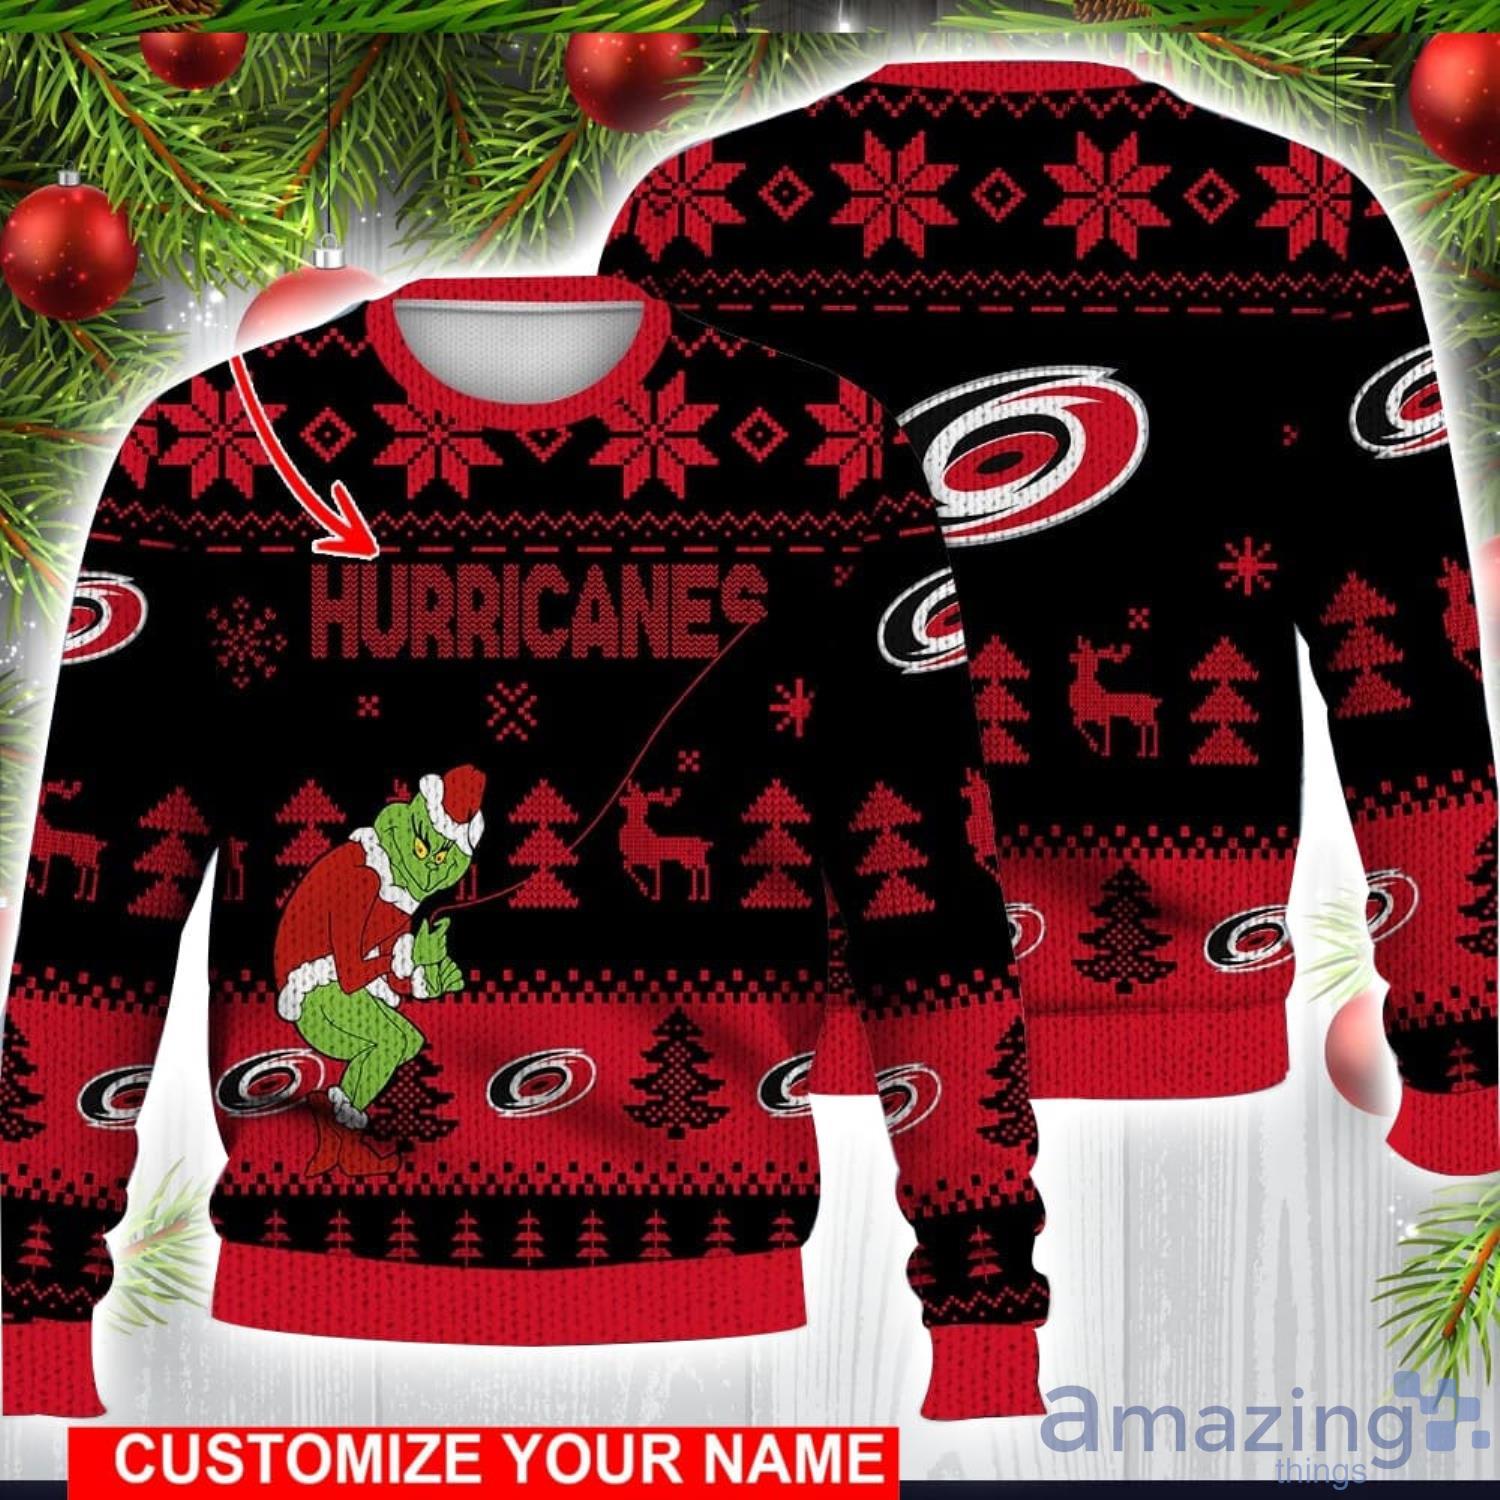 Best Carolina Hurricanes Gifts Show Your Support for the Team and Fight Against Cancer